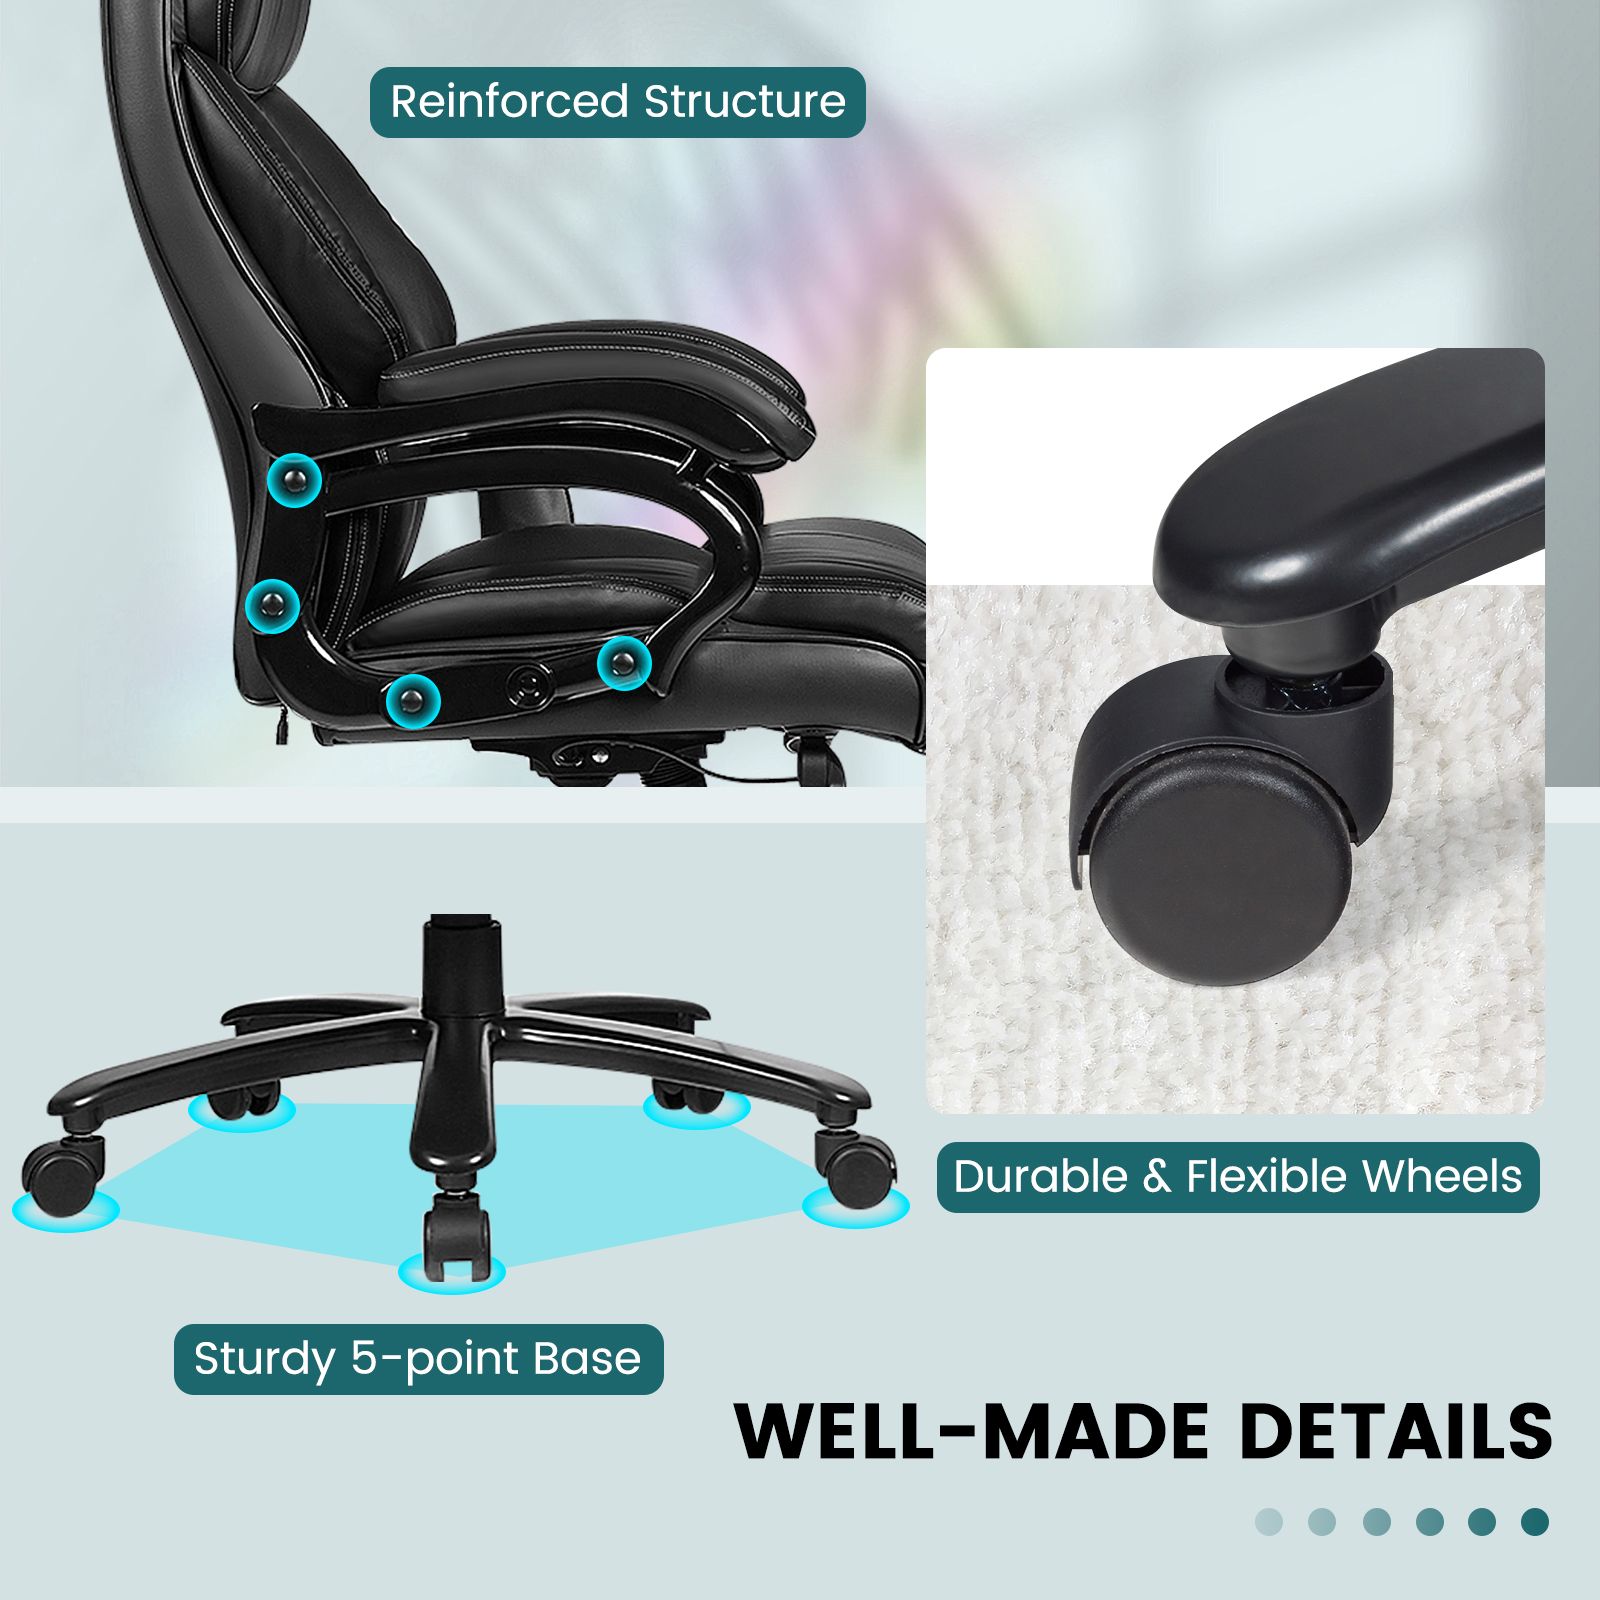 Ergonomic Office Chair with Padded Armrests and Adjustable Height